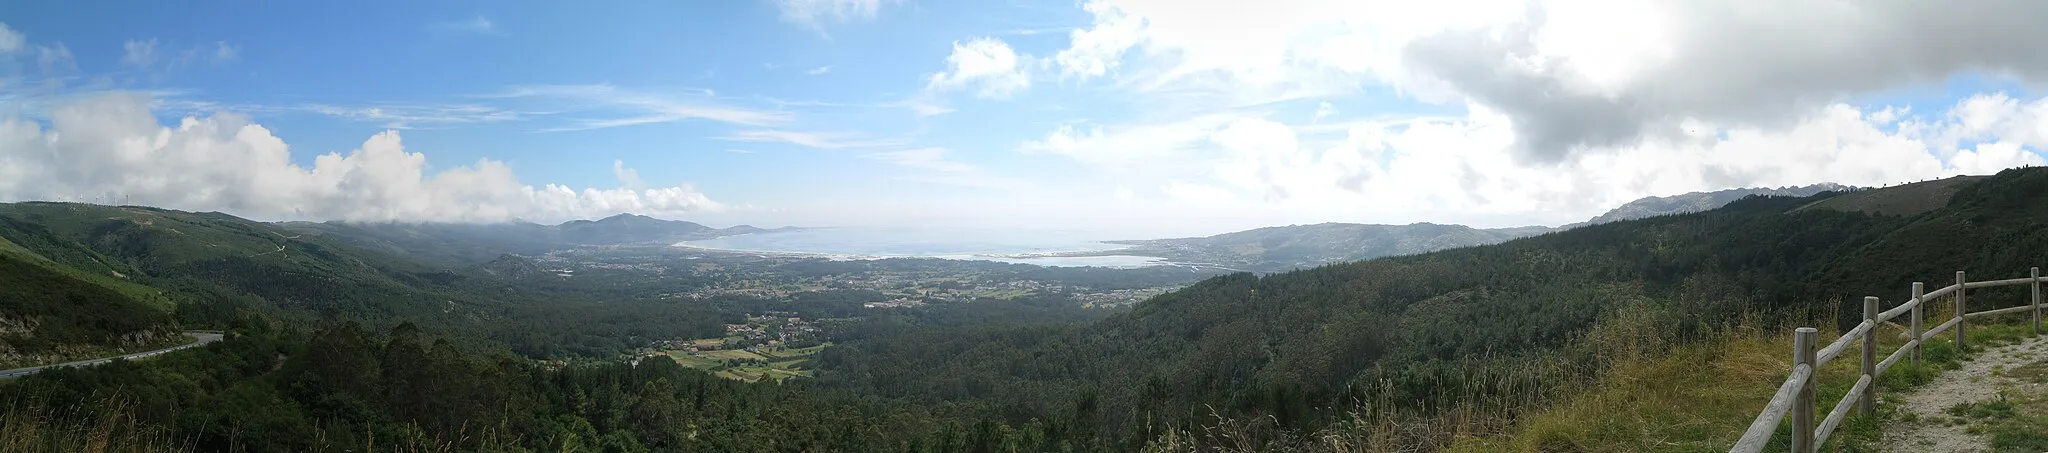 Photo showing: View from the viewpoint of Louredo (in Galicia, Spain), with the beach of Carnota in the background.